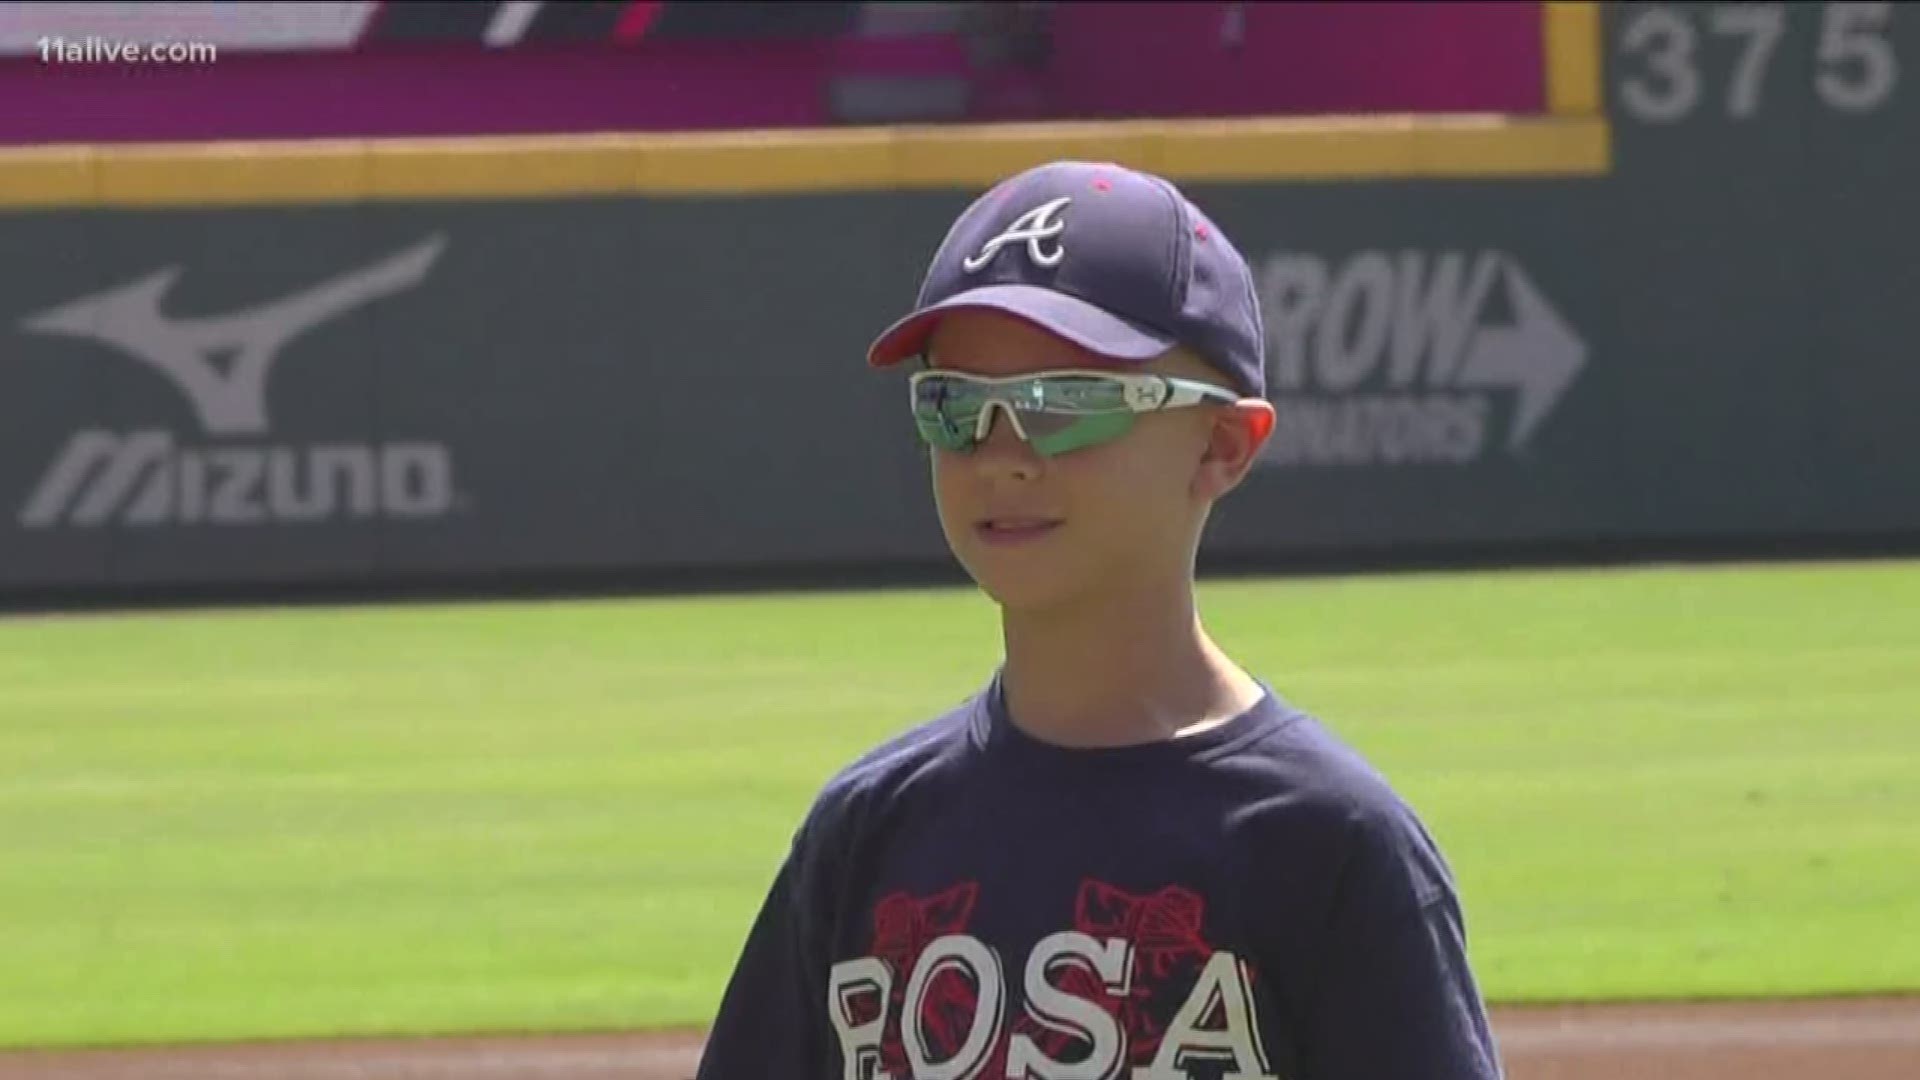 Thursday was a day to remember for Sam Rosa, a cancer survivor who recently lost his father to leukemia.